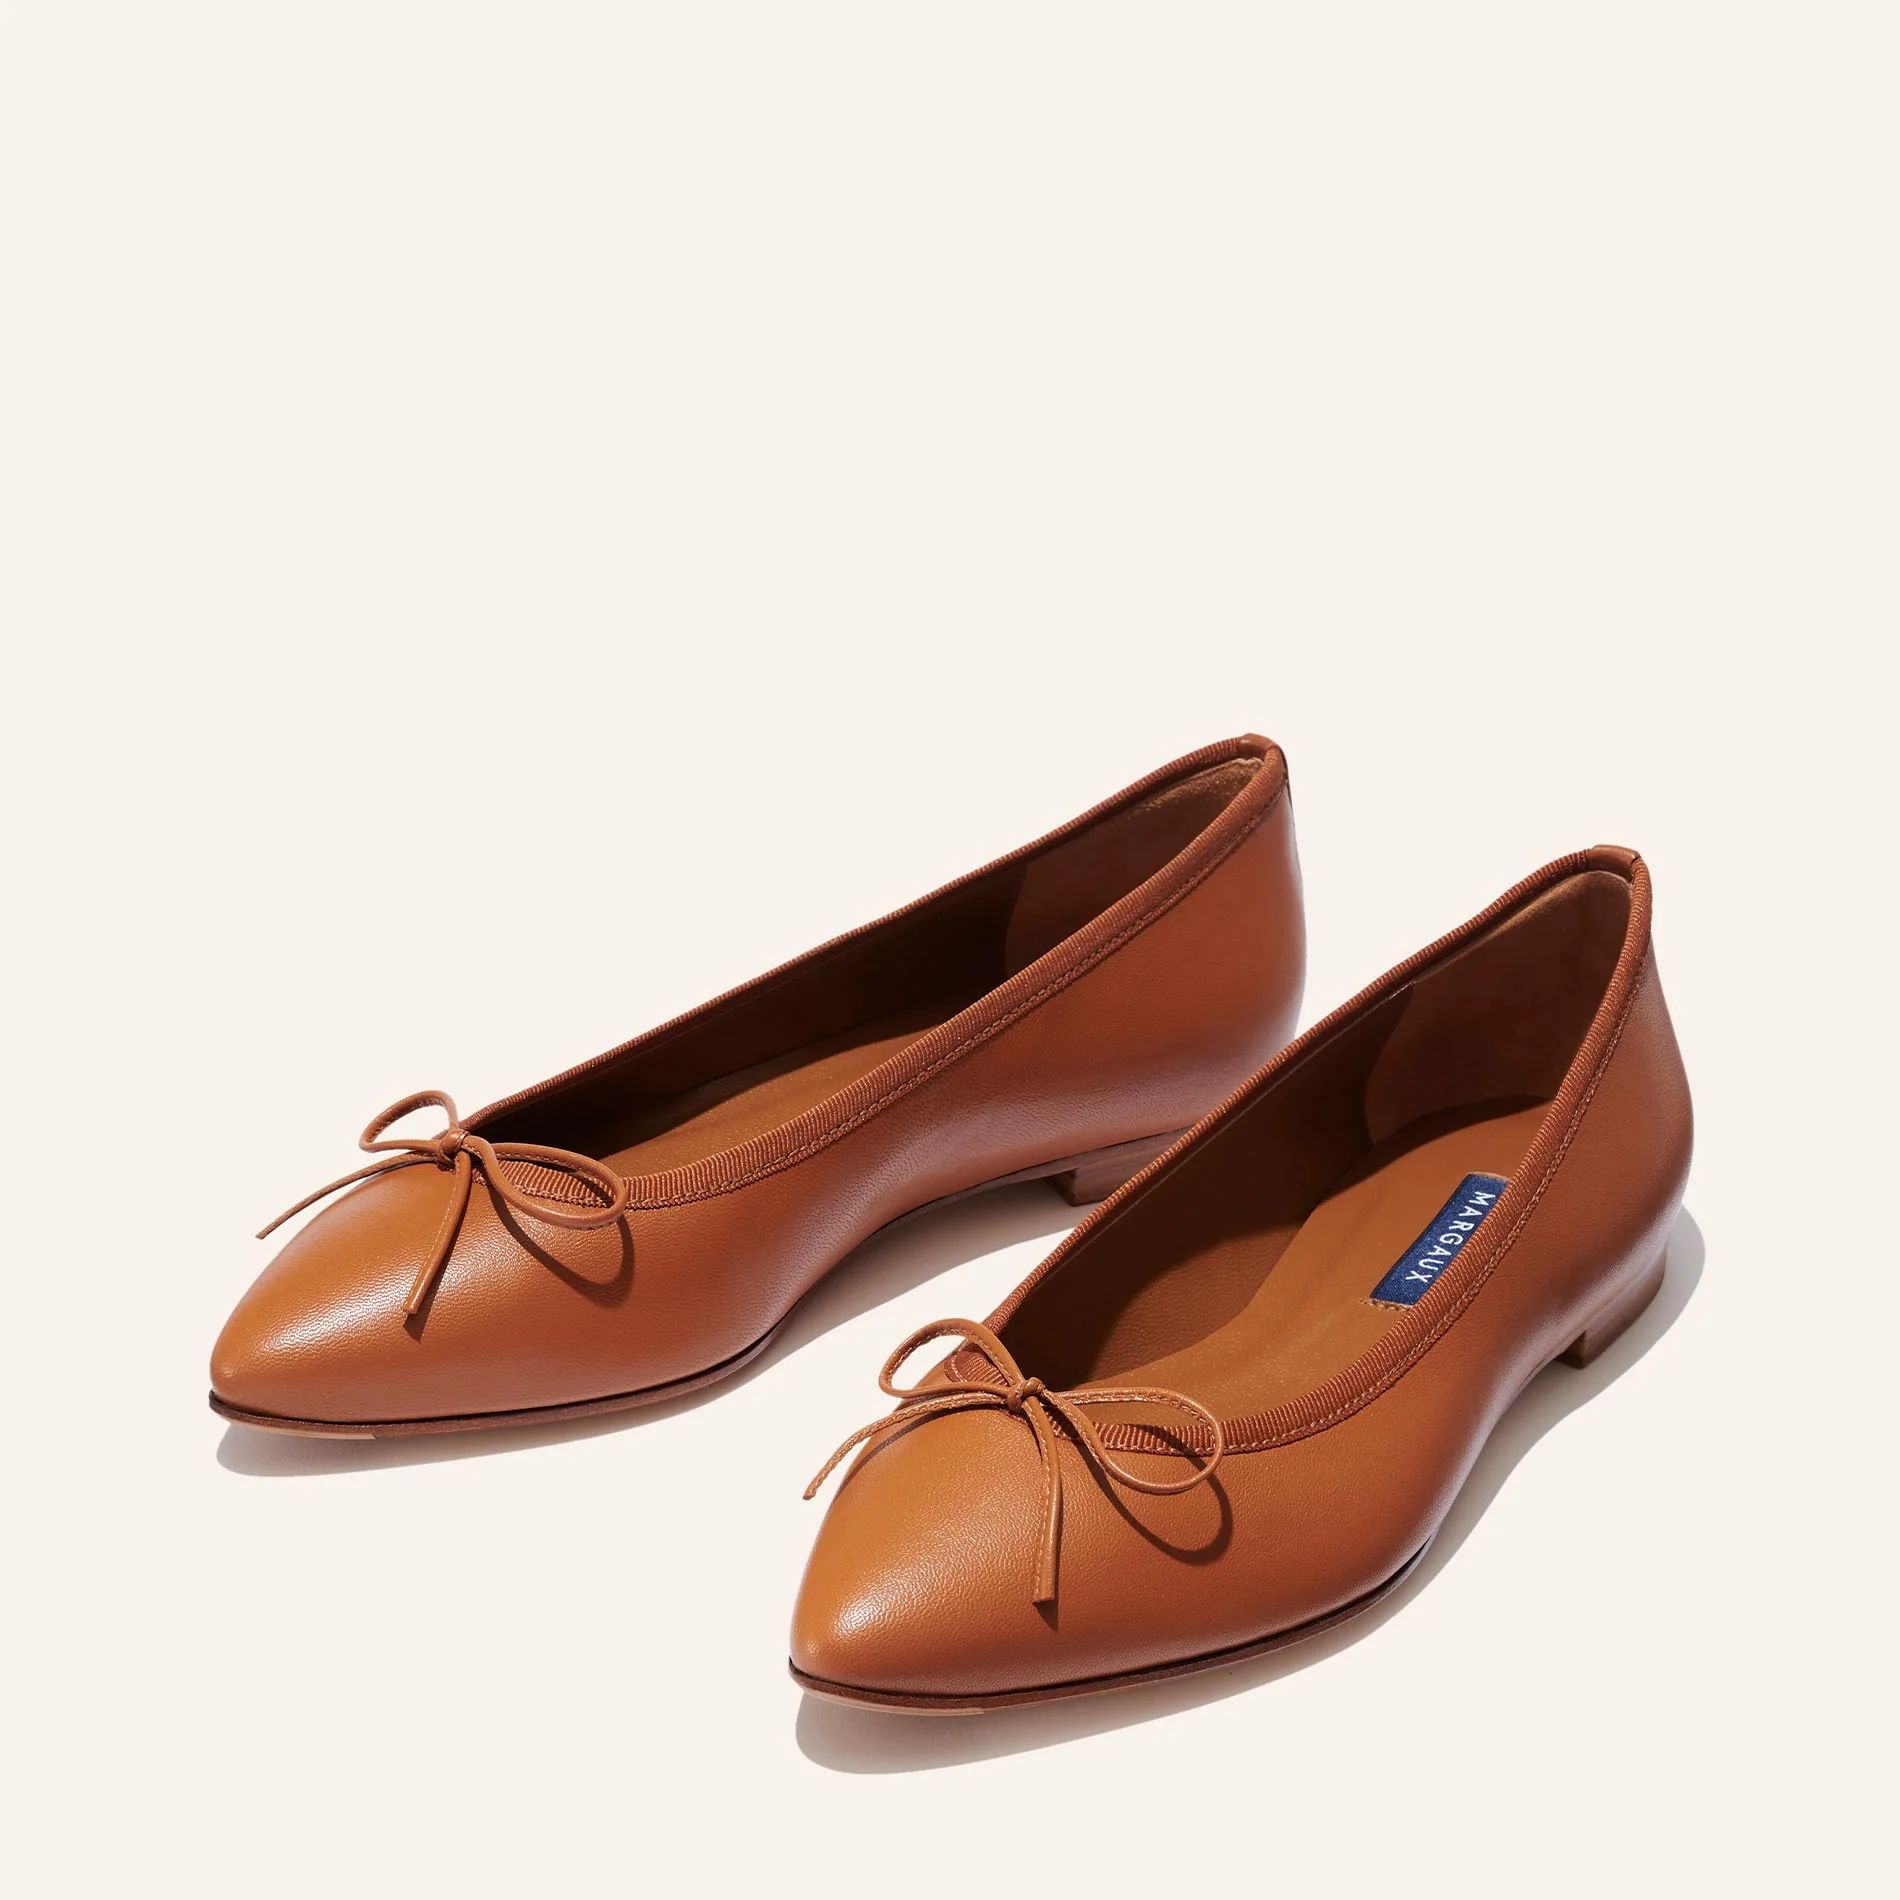 The Pointe - Saddle Nappa | Margaux